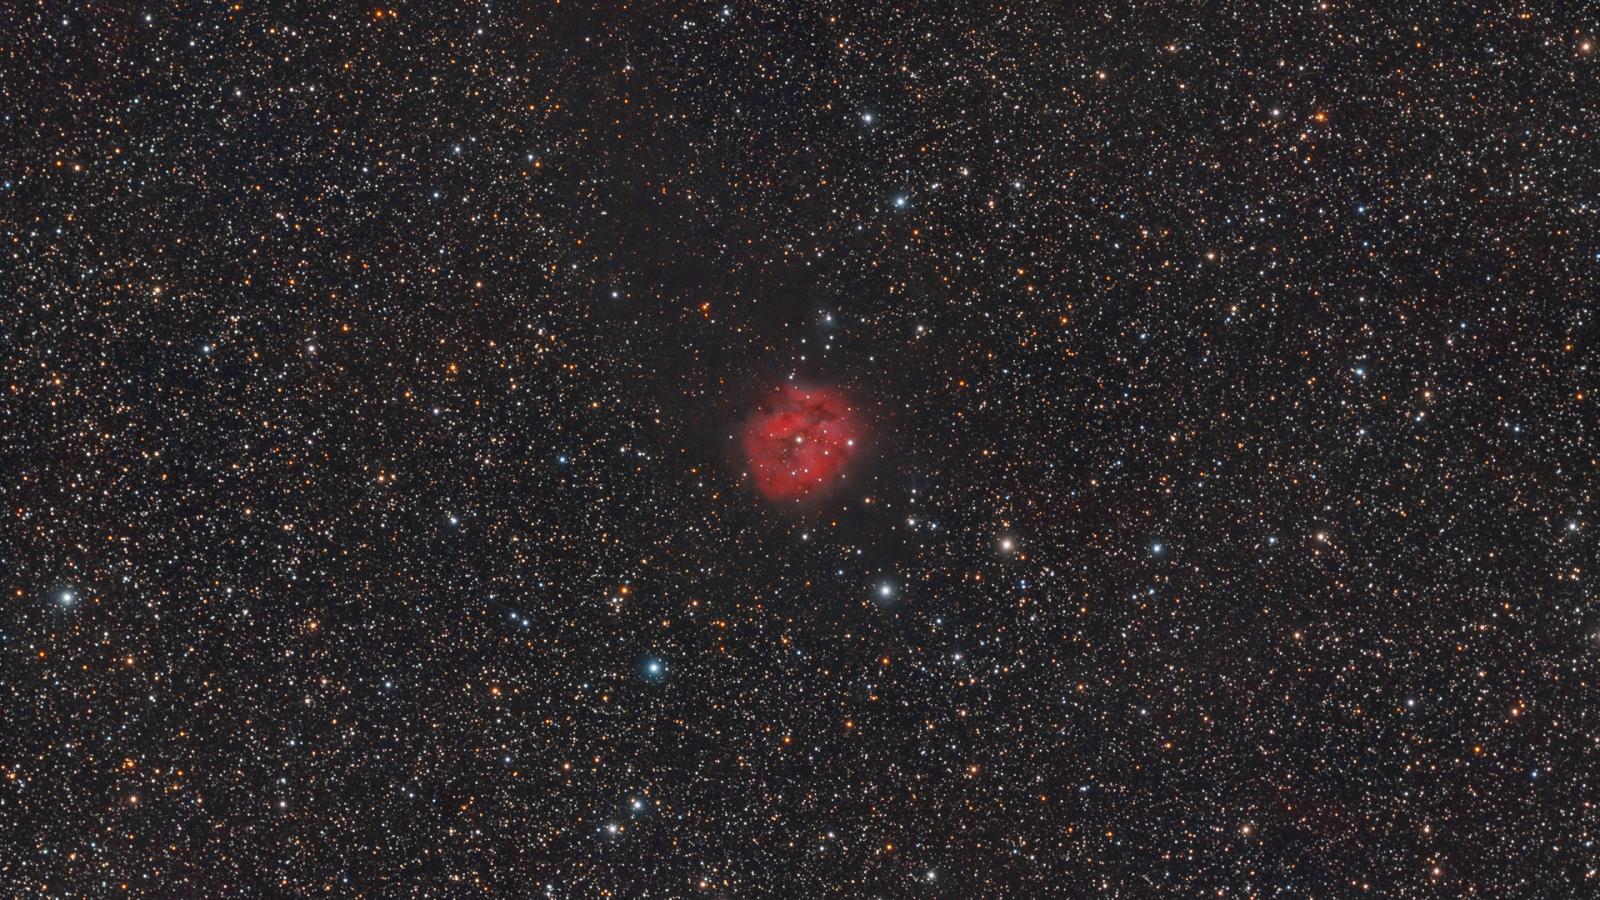 a large red cocoon nebula among the stars